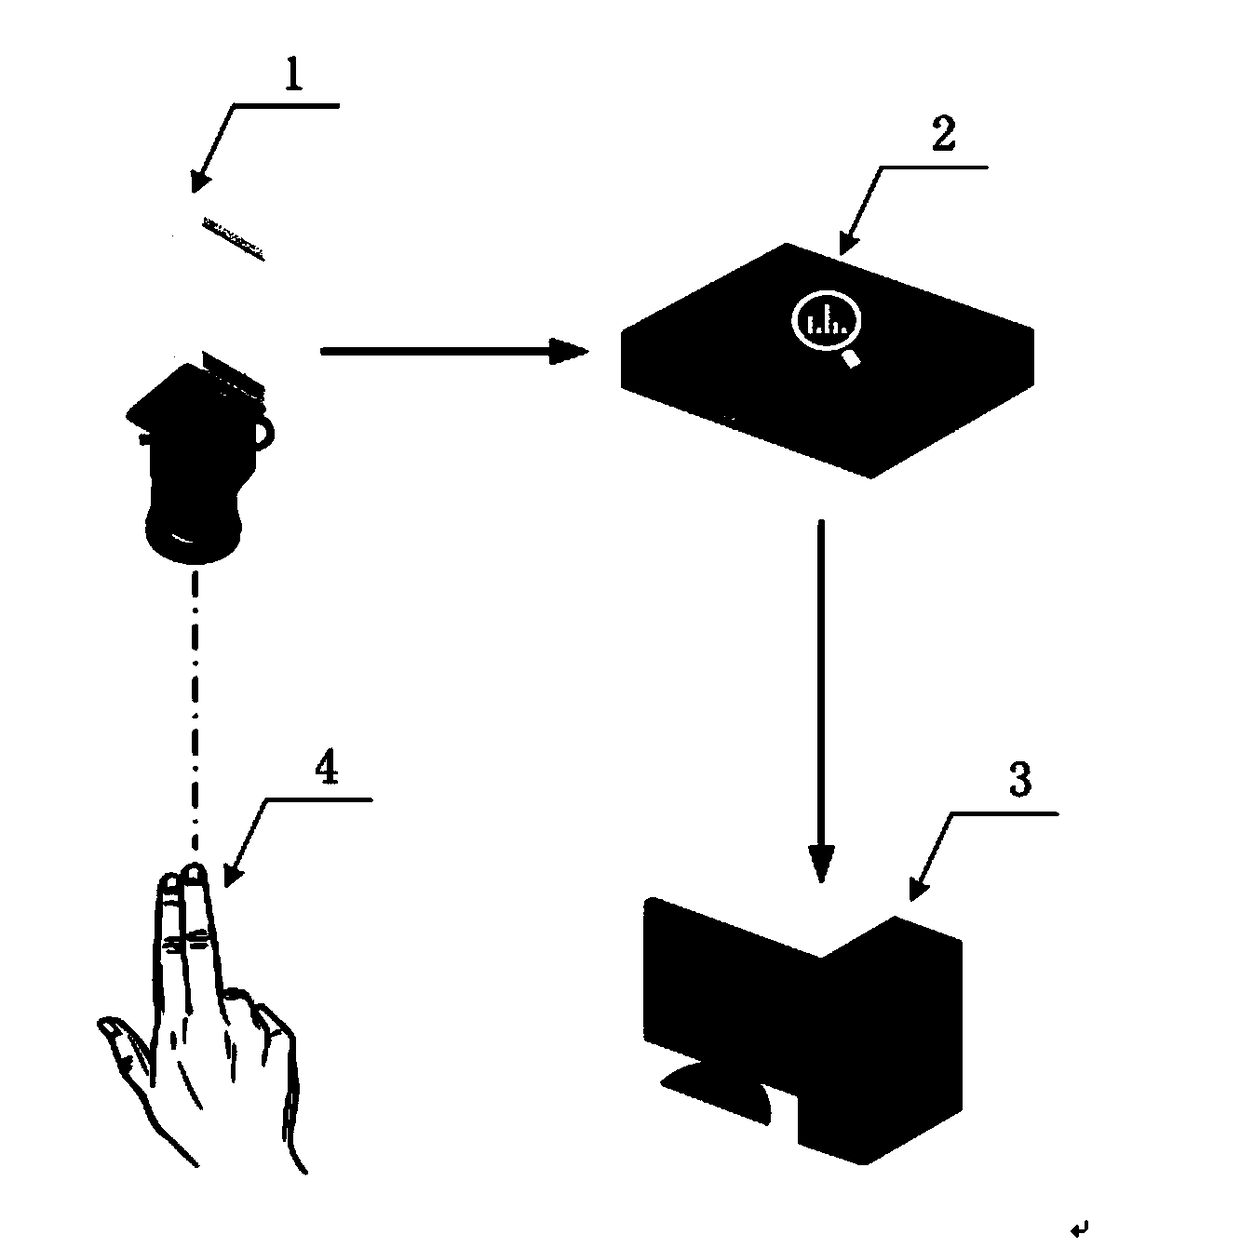 A sword finger gesture real-time recognition system based on contour analysis